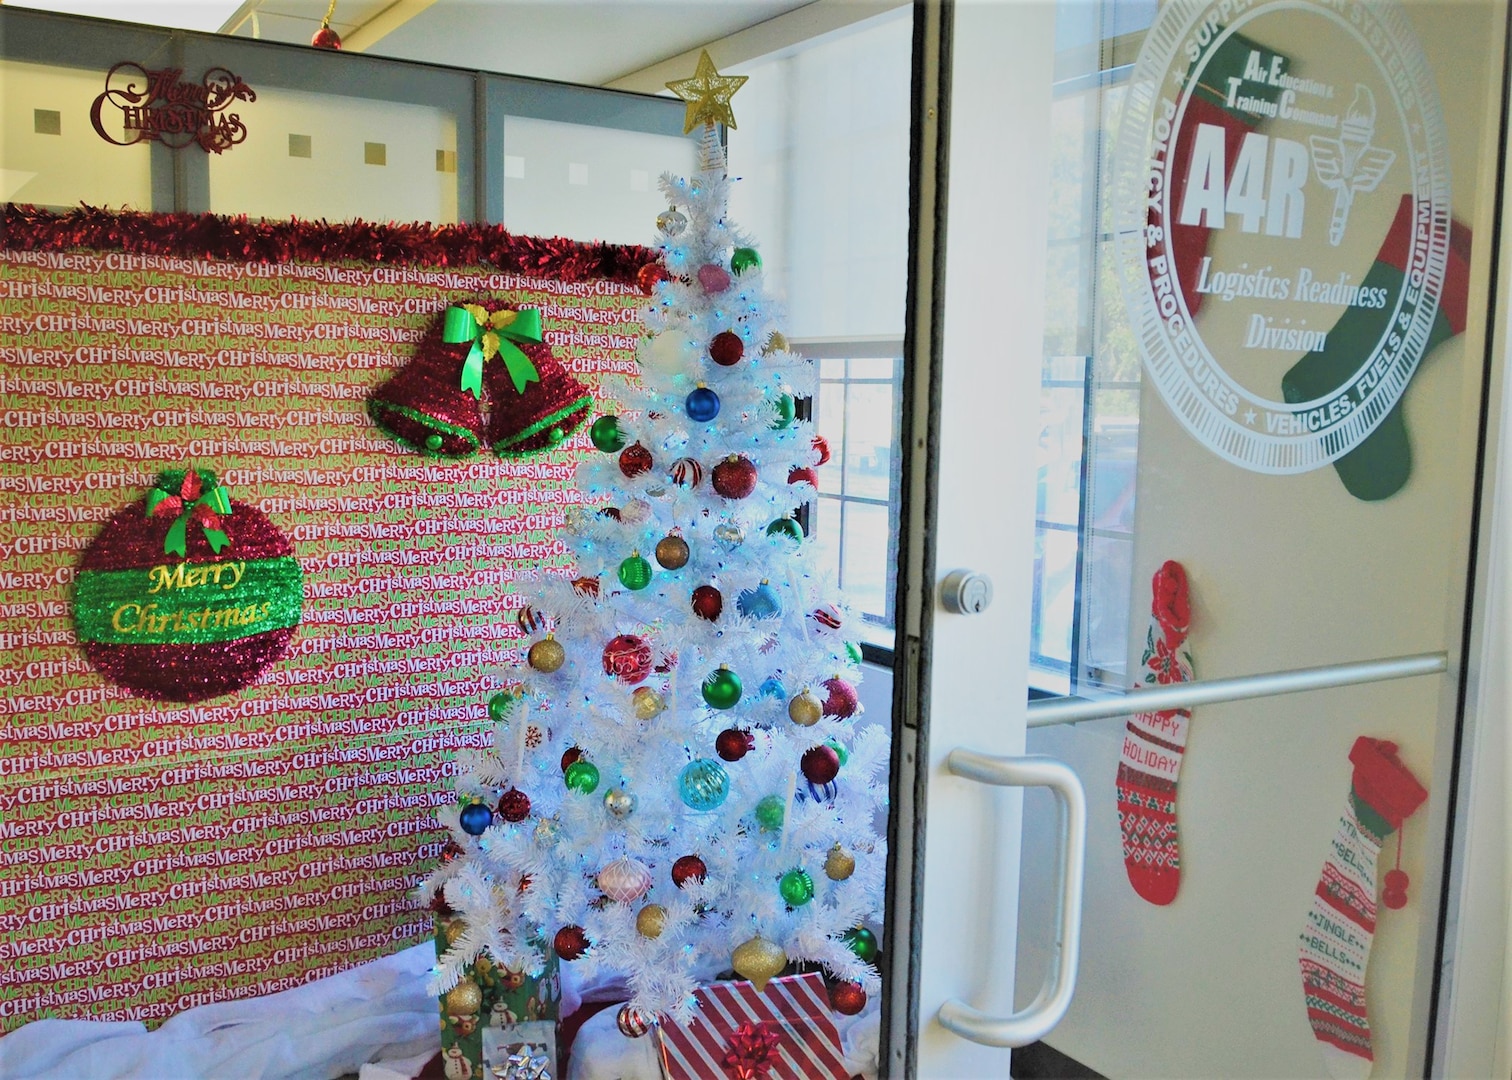 The entrance of the Air Education Training Command, A4R Logistics and Readiness office is decorated with a Christmas tree and stockings by Marc Collette, Headquarters AETC, command equipment manager, A4R, Dec. 4, 2018 at Joint Base San Antonio, Texas. Every decoration is purchased with Collette’s own money and he utilizes his family day after Thanksgiving to set up.